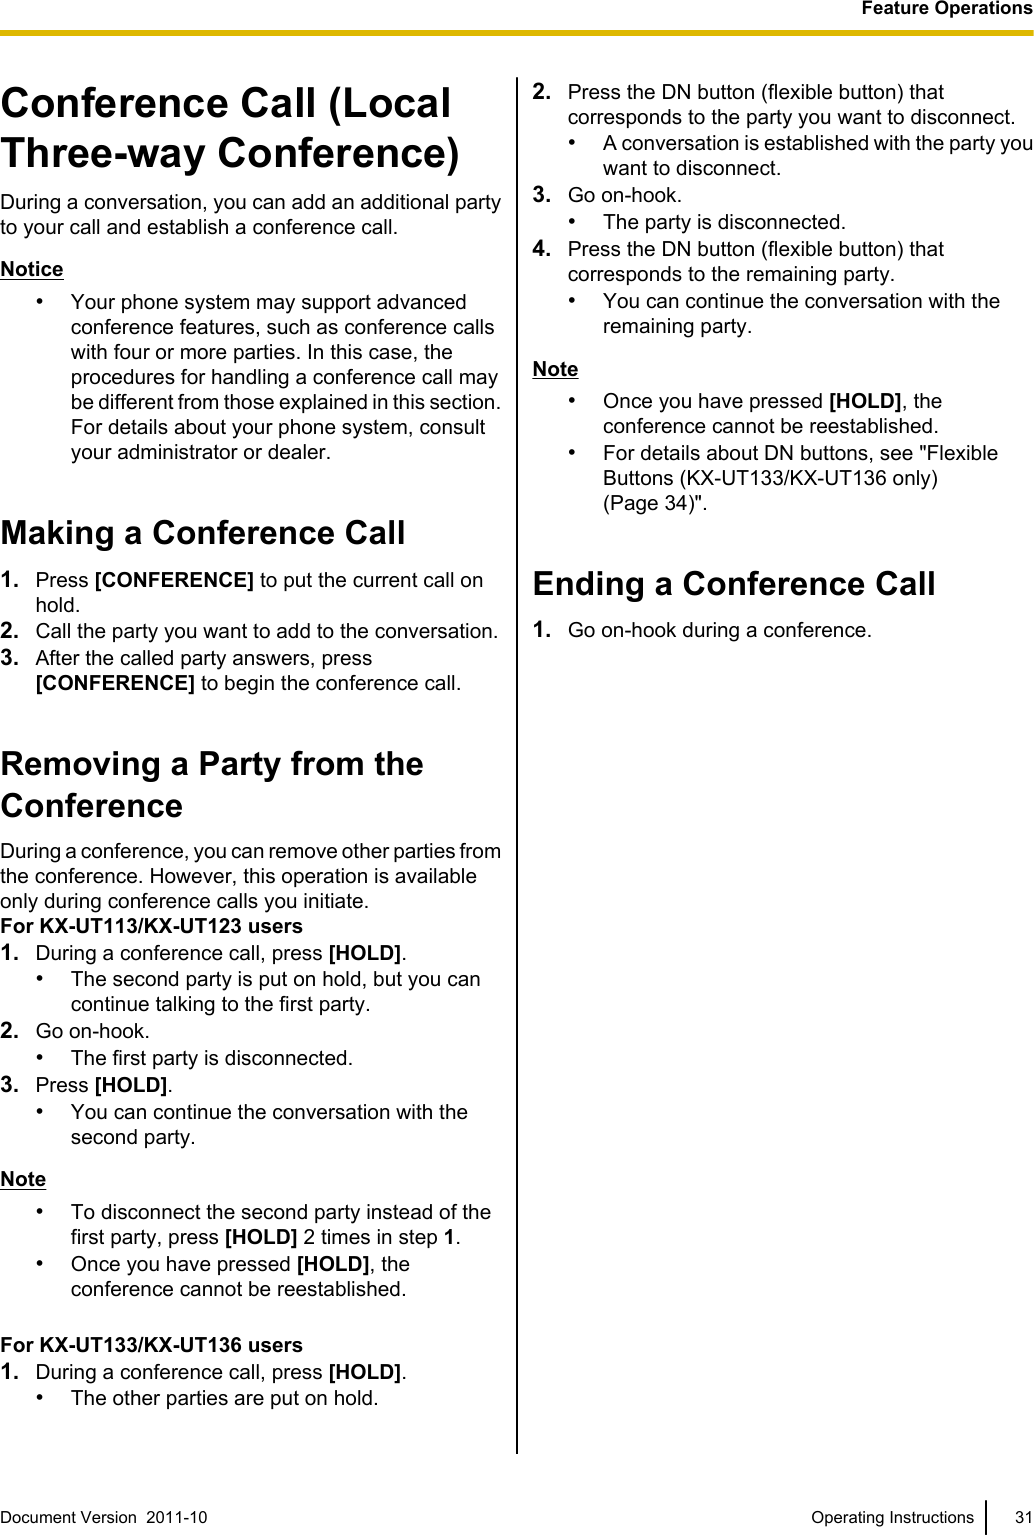 Conference Call (LocalThree-way Conference)During a conversation, you can add an additional partyto your call and establish a conference call.Notice•Your phone system may support advancedconference features, such as conference callswith four or more parties. In this case, theprocedures for handling a conference call maybe different from those explained in this section.For details about your phone system, consultyour administrator or dealer.Making a Conference Call1. Press [CONFERENCE] to put the current call onhold.2. Call the party you want to add to the conversation.3. After the called party answers, press[CONFERENCE] to begin the conference call.Removing a Party from theConferenceDuring a conference, you can remove other parties fromthe conference. However, this operation is availableonly during conference calls you initiate.For KX-UT113/KX-UT123 users1. During a conference call, press [HOLD].•The second party is put on hold, but you cancontinue talking to the first party.2. Go on-hook.•The first party is disconnected.3. Press [HOLD].•You can continue the conversation with thesecond party.Note•To disconnect the second party instead of thefirst party, press [HOLD] 2 times in step 1.•Once you have pressed [HOLD], theconference cannot be reestablished.For KX-UT133/KX-UT136 users1. During a conference call, press [HOLD].•The other parties are put on hold.2. Press the DN button (flexible button) thatcorresponds to the party you want to disconnect.•A conversation is established with the party youwant to disconnect.3. Go on-hook.•The party is disconnected.4. Press the DN button (flexible button) thatcorresponds to the remaining party.•You can continue the conversation with theremaining party.Note•Once you have pressed [HOLD], theconference cannot be reestablished.•For details about DN buttons, see &quot;FlexibleButtons (KX-UT133/KX-UT136 only)(Page 34)&quot;.Ending a Conference Call1. Go on-hook during a conference.Document Version  2011-10   Operating Instructions 31Feature Operations